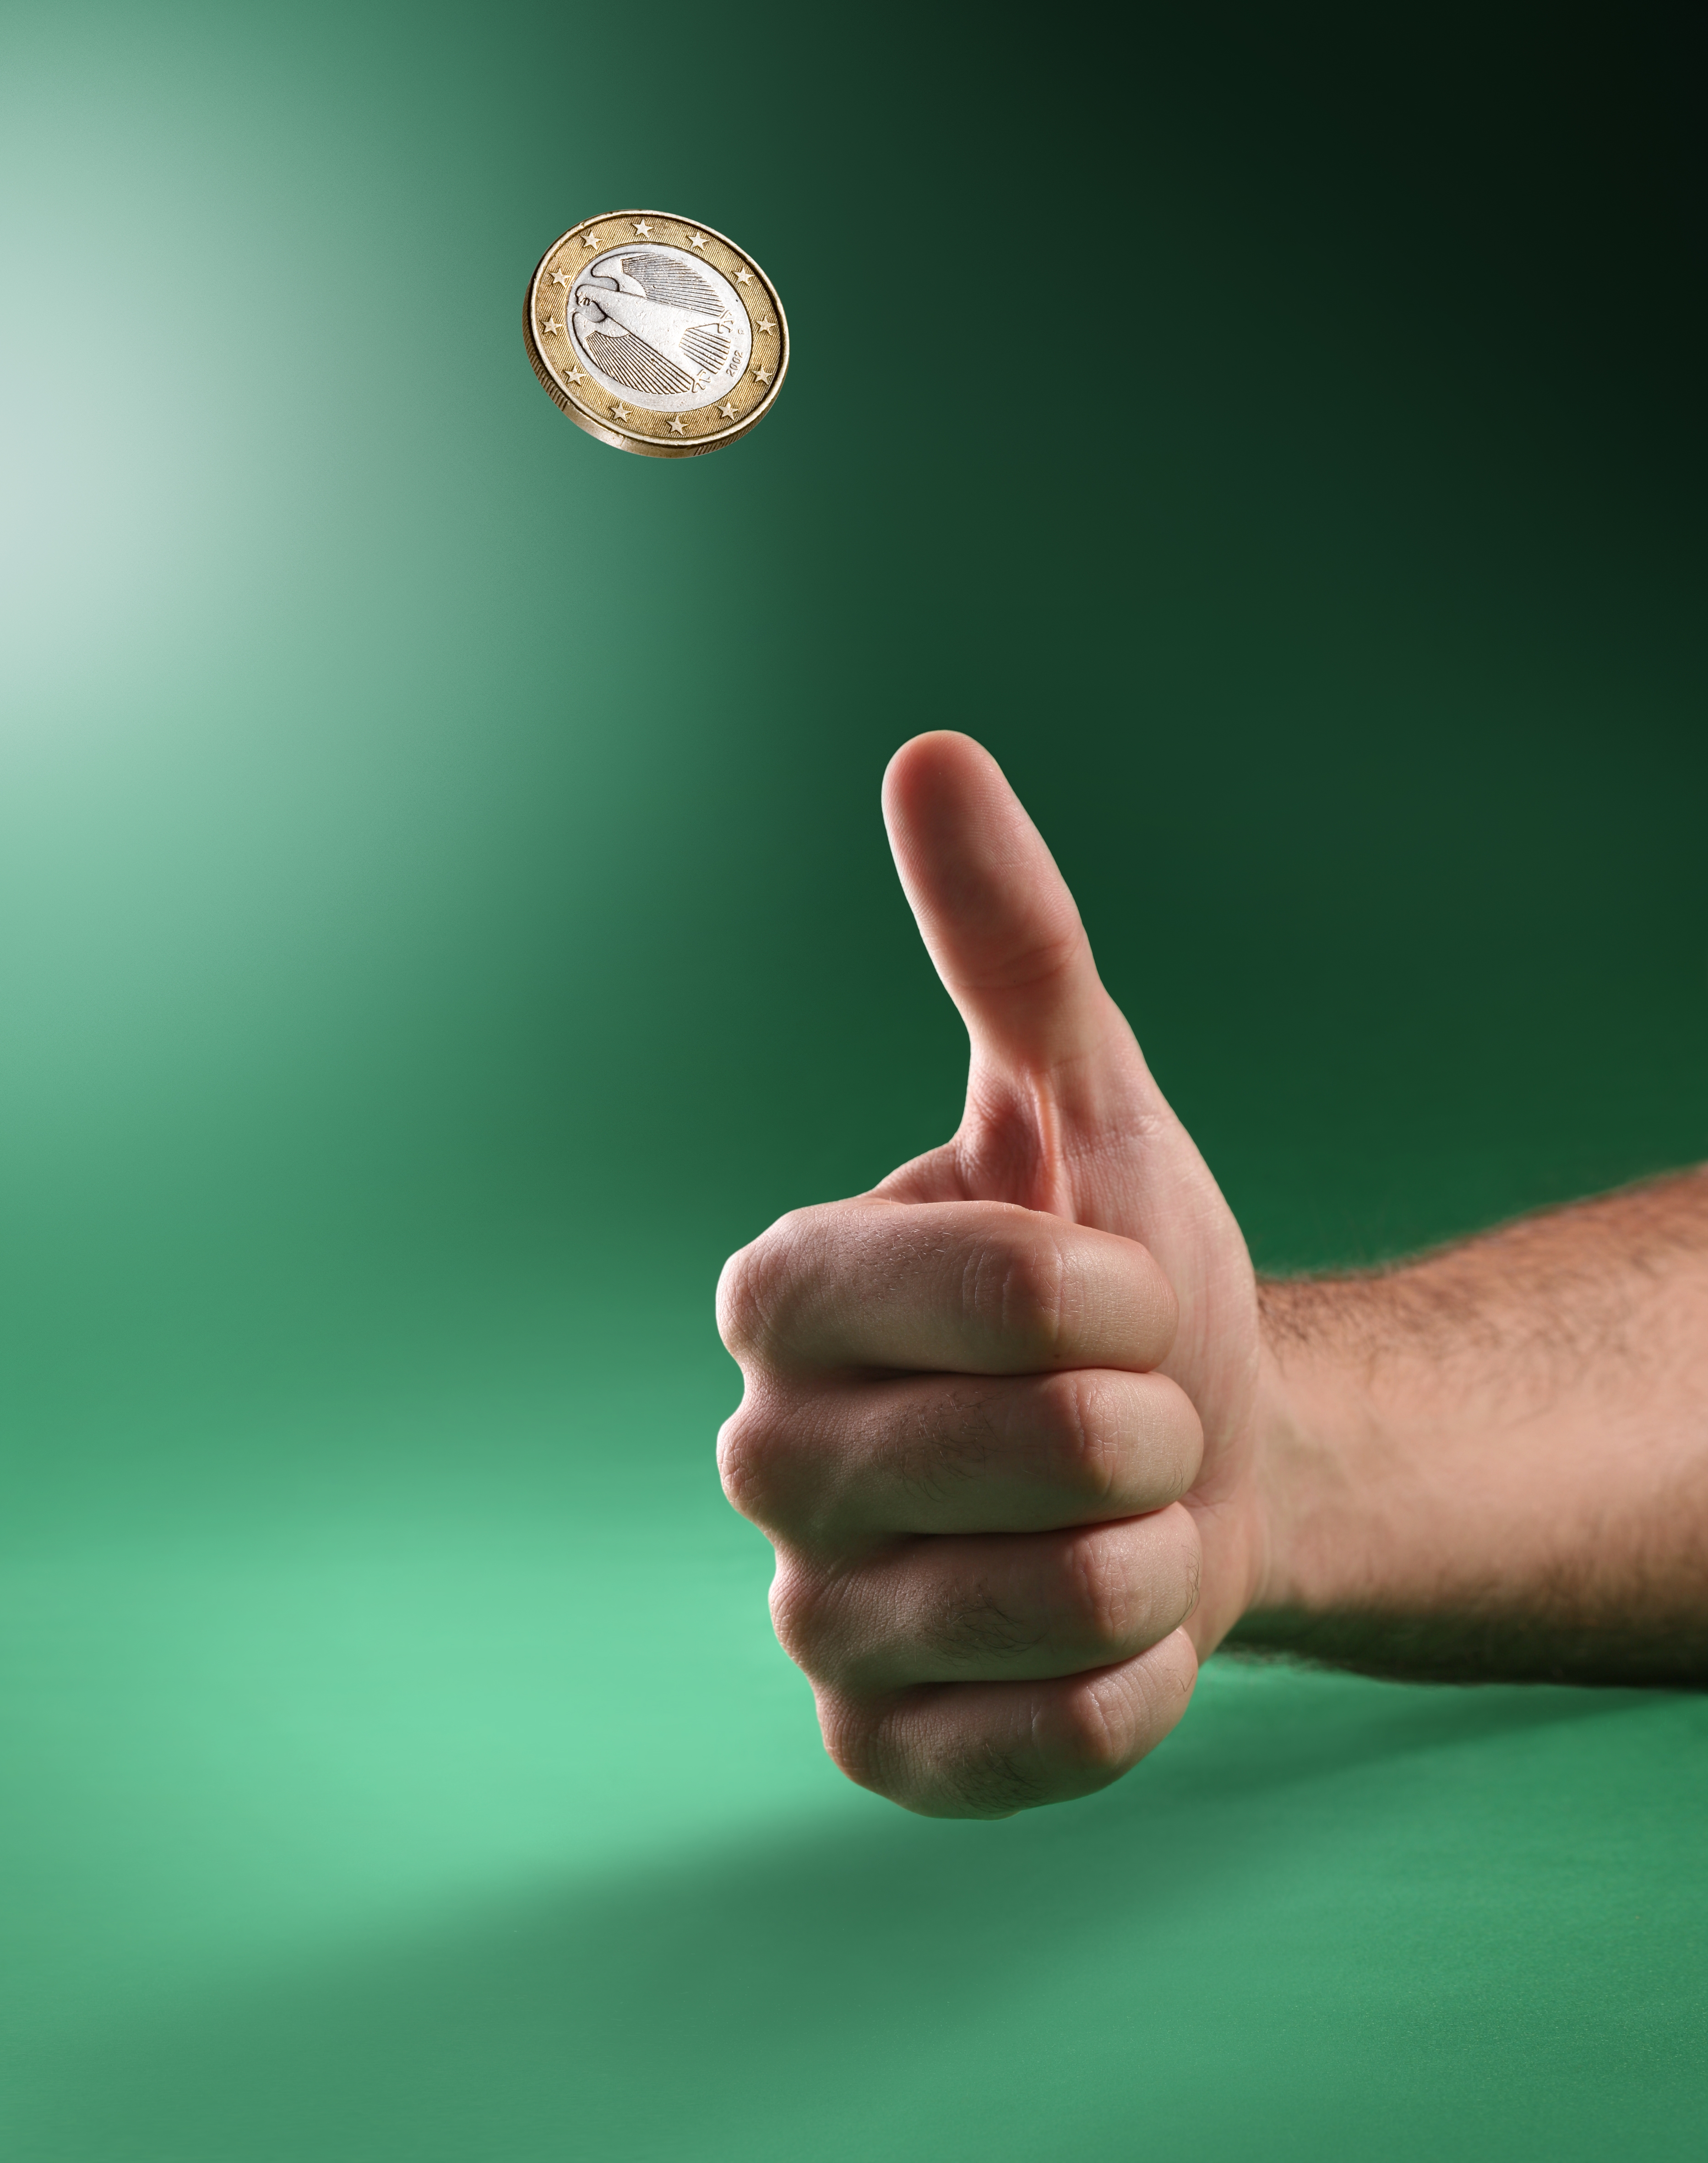 Flip A Coin - Coin Toss Online: Heads or Tails?